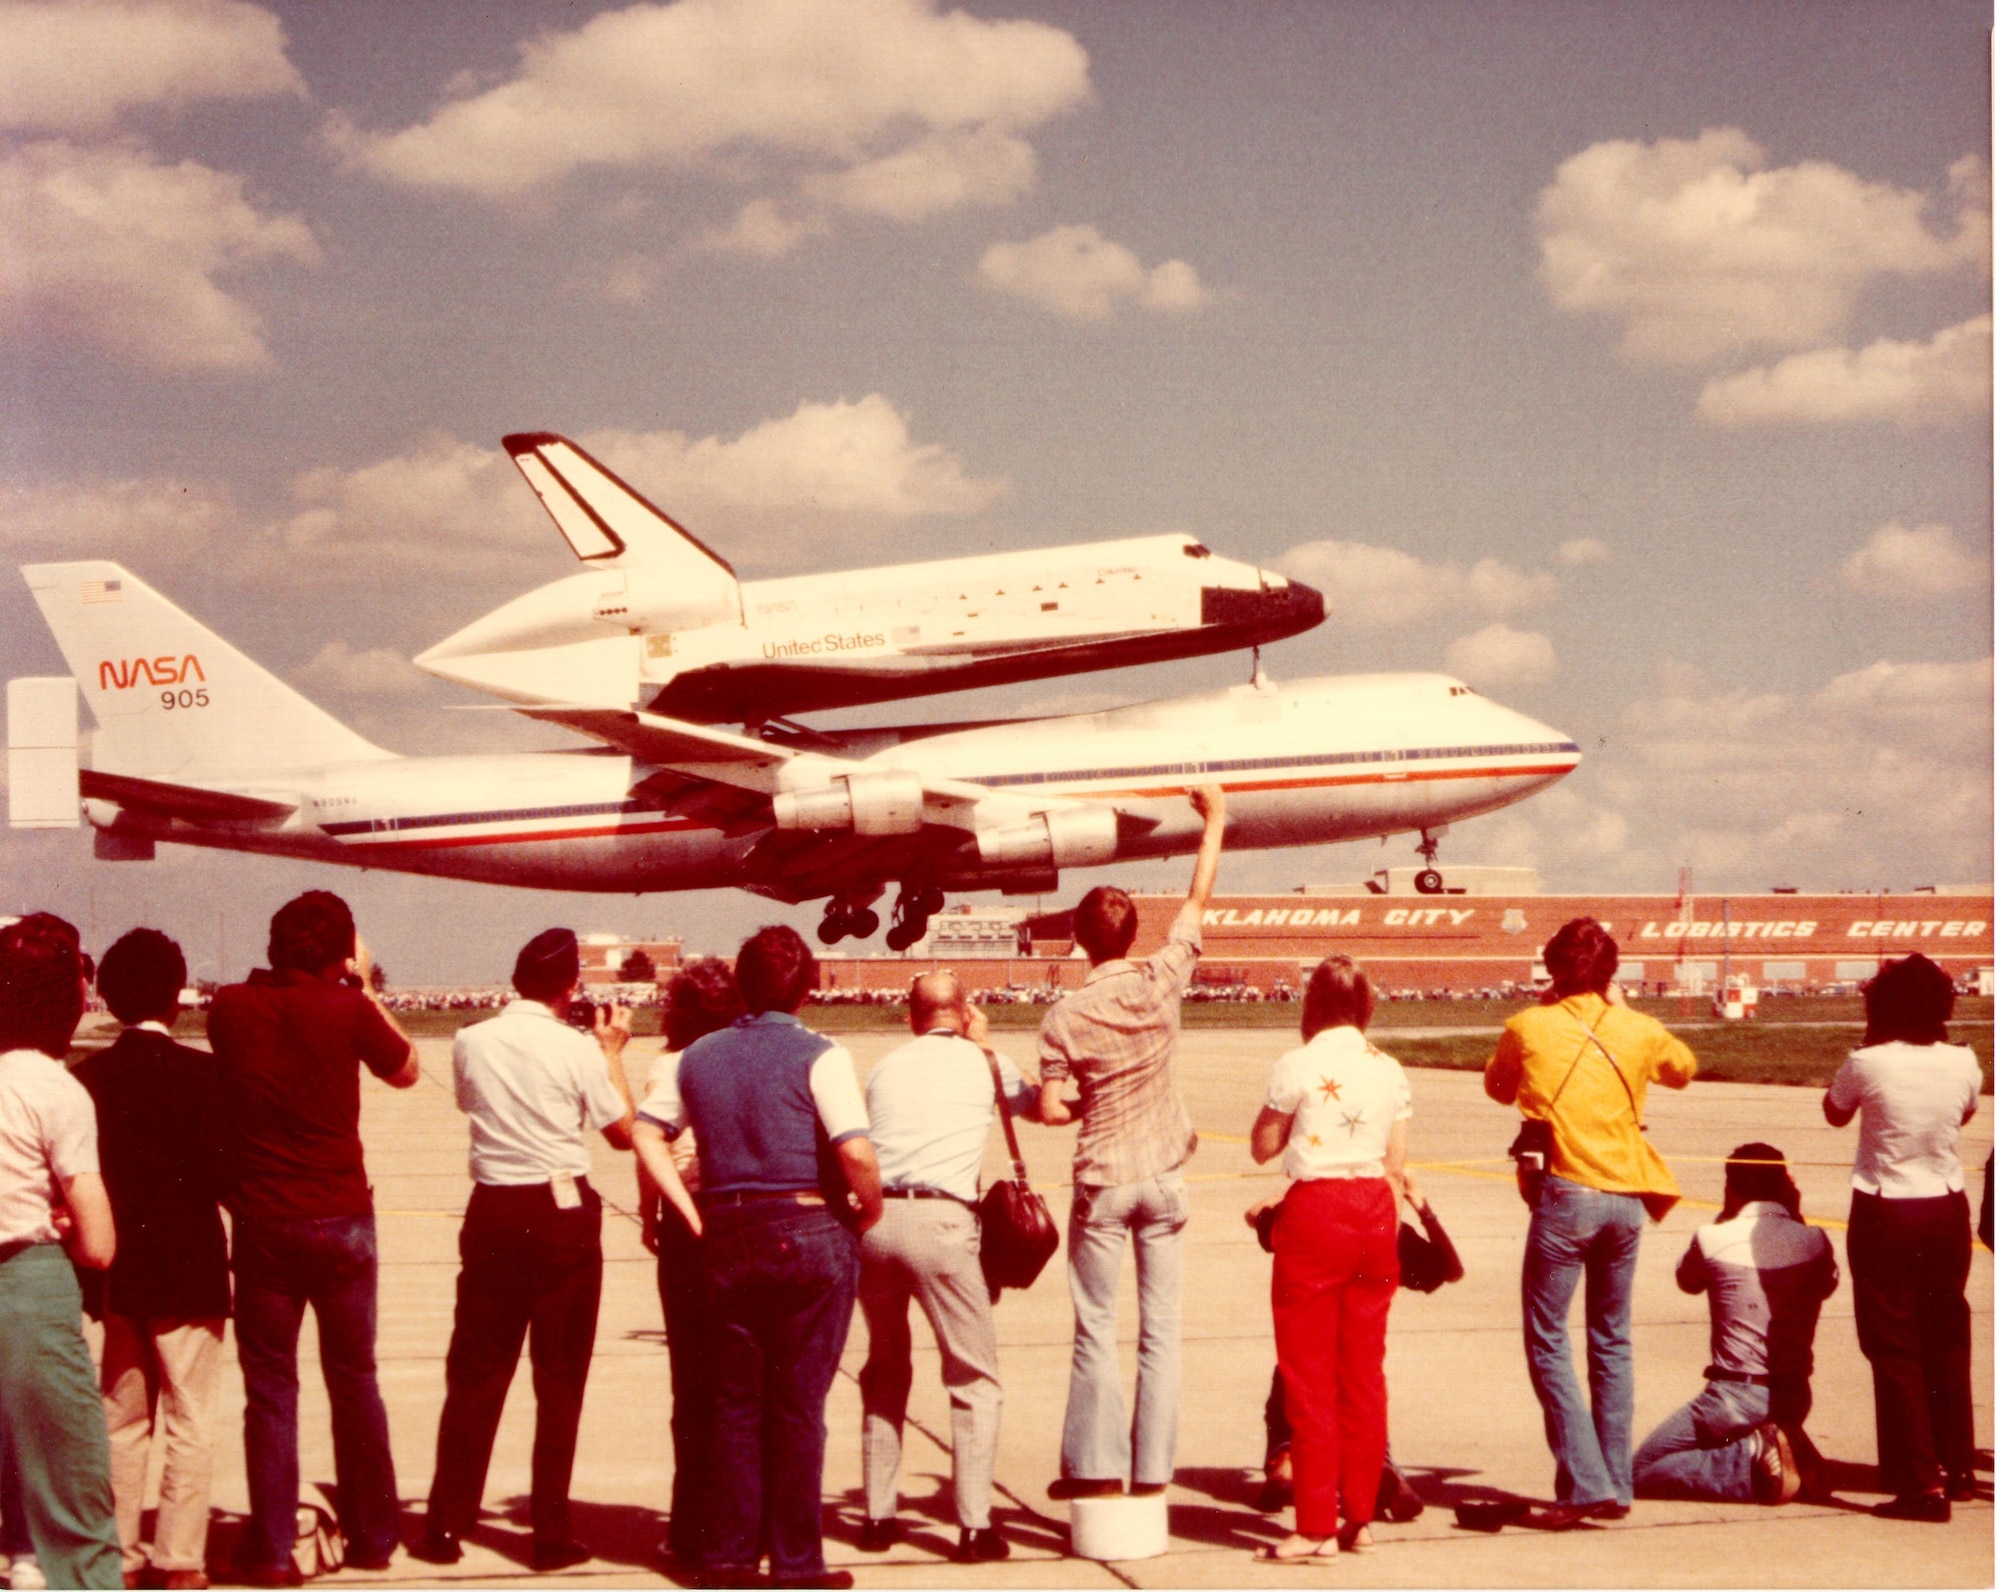 The space shuttle “Columbia” lands at Tinker AFB April 27, 1981, for an overnight stopover following its first orbital mission and touchdown in the California desert. More than 200,000 sightseers greet the shuttle, which rides securely on the back of a Boeing 747.